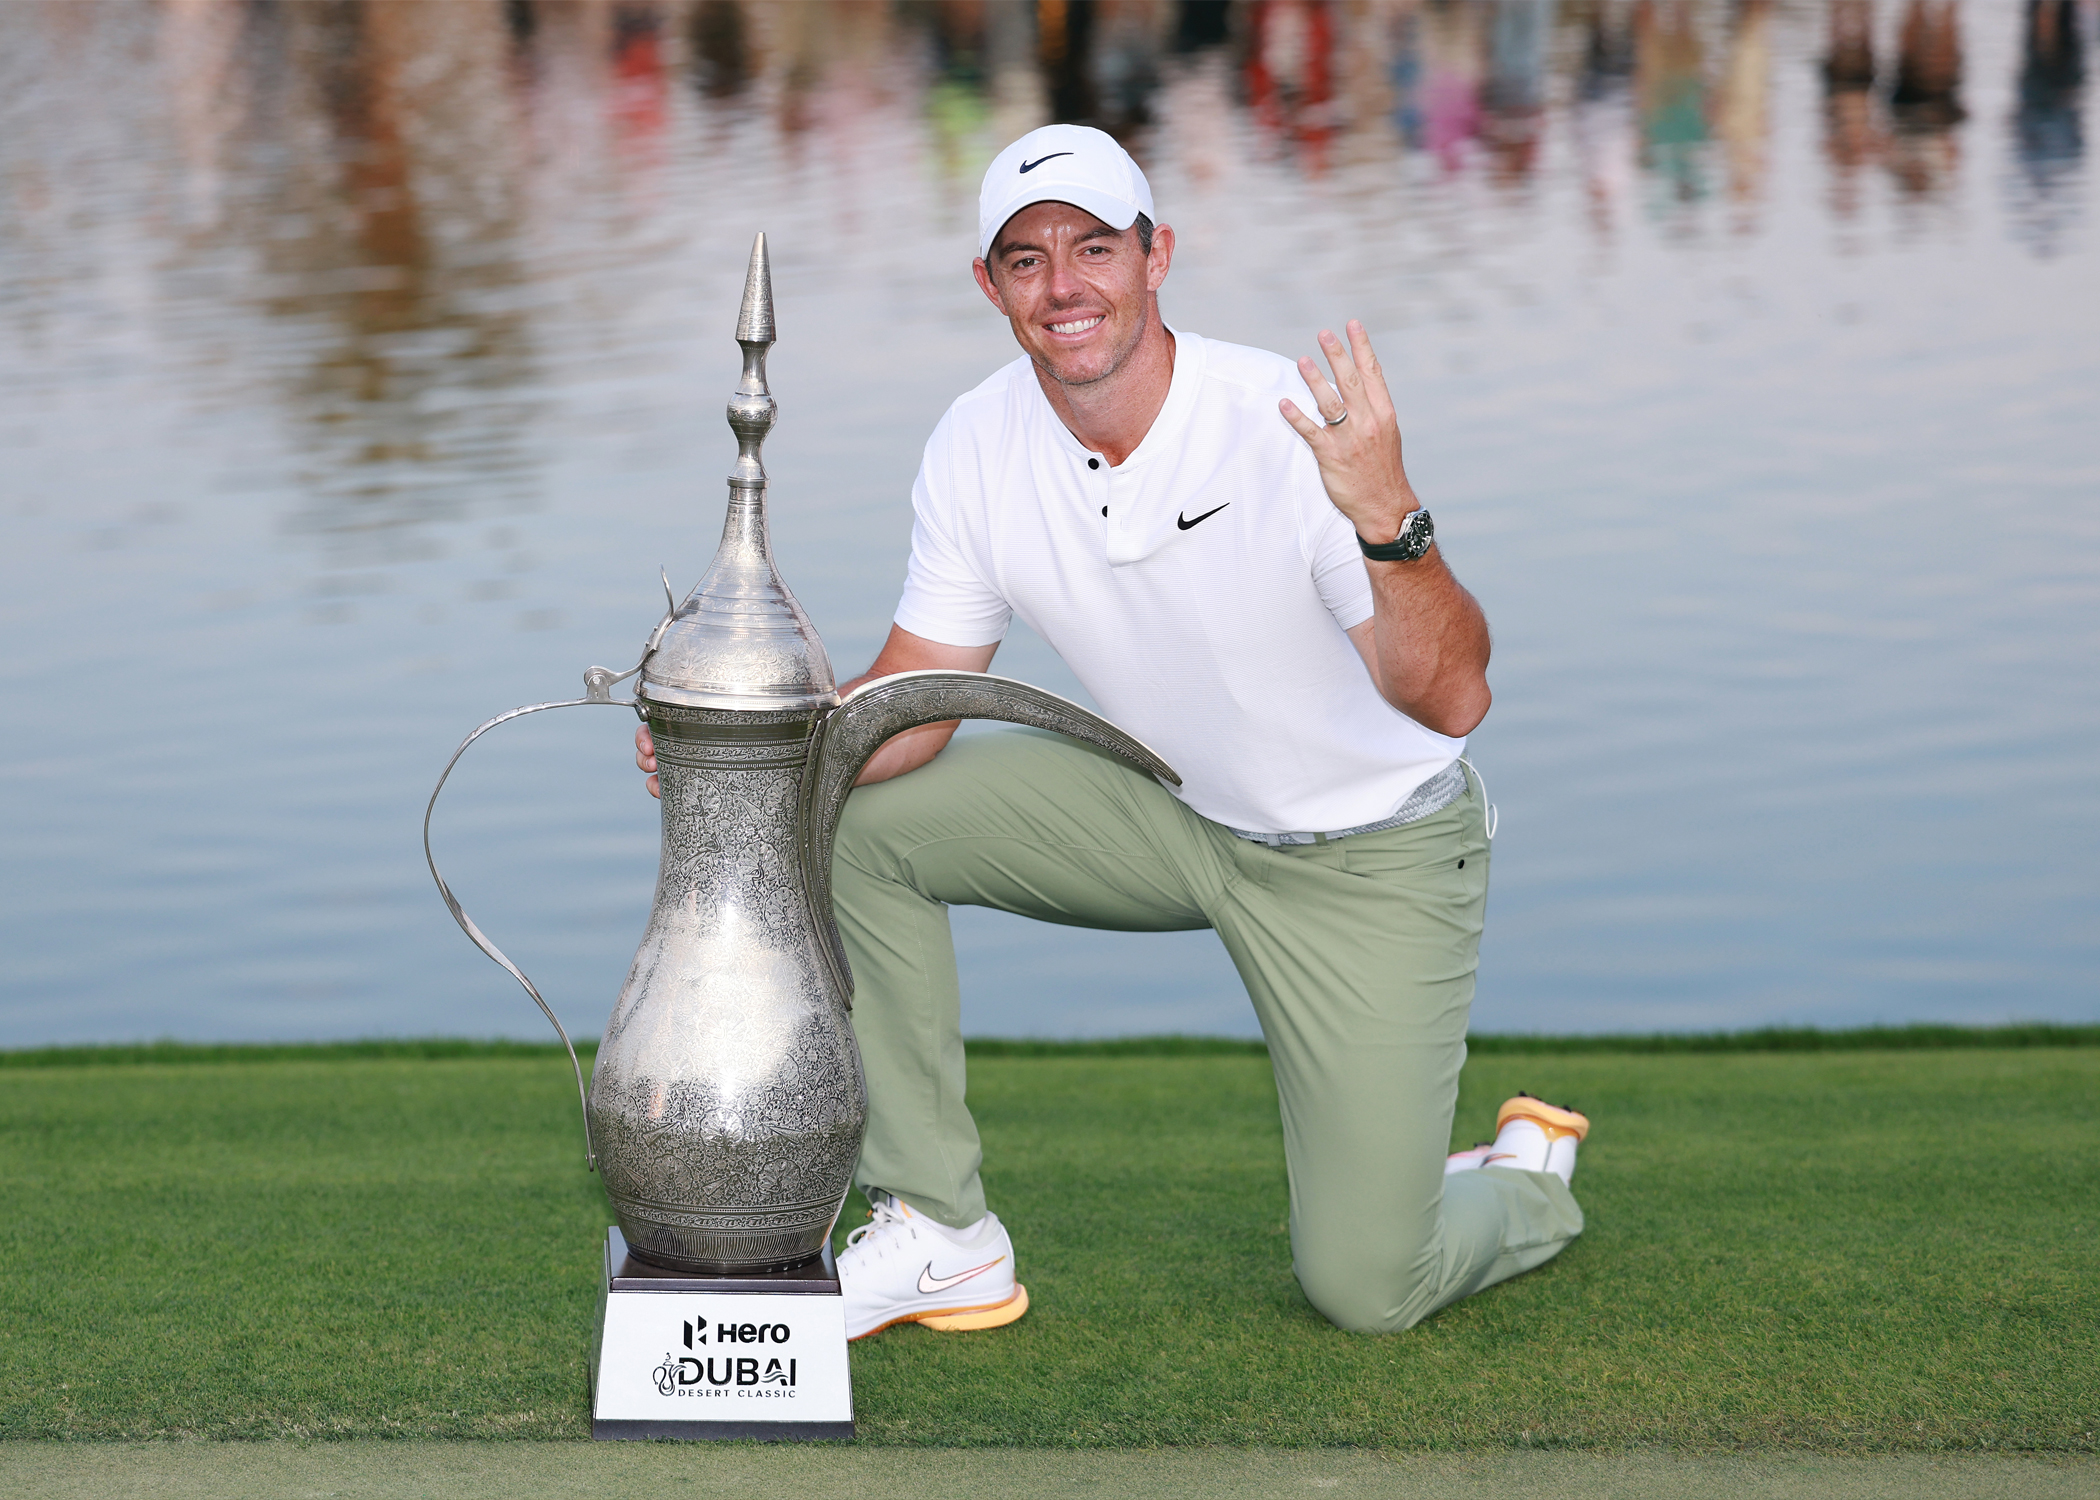 RORY MCILROY RISES TO THE OCCASION TO SECURE HISTORIC FOURTH HERO DUBAI DESERT CLASSIC TITLE